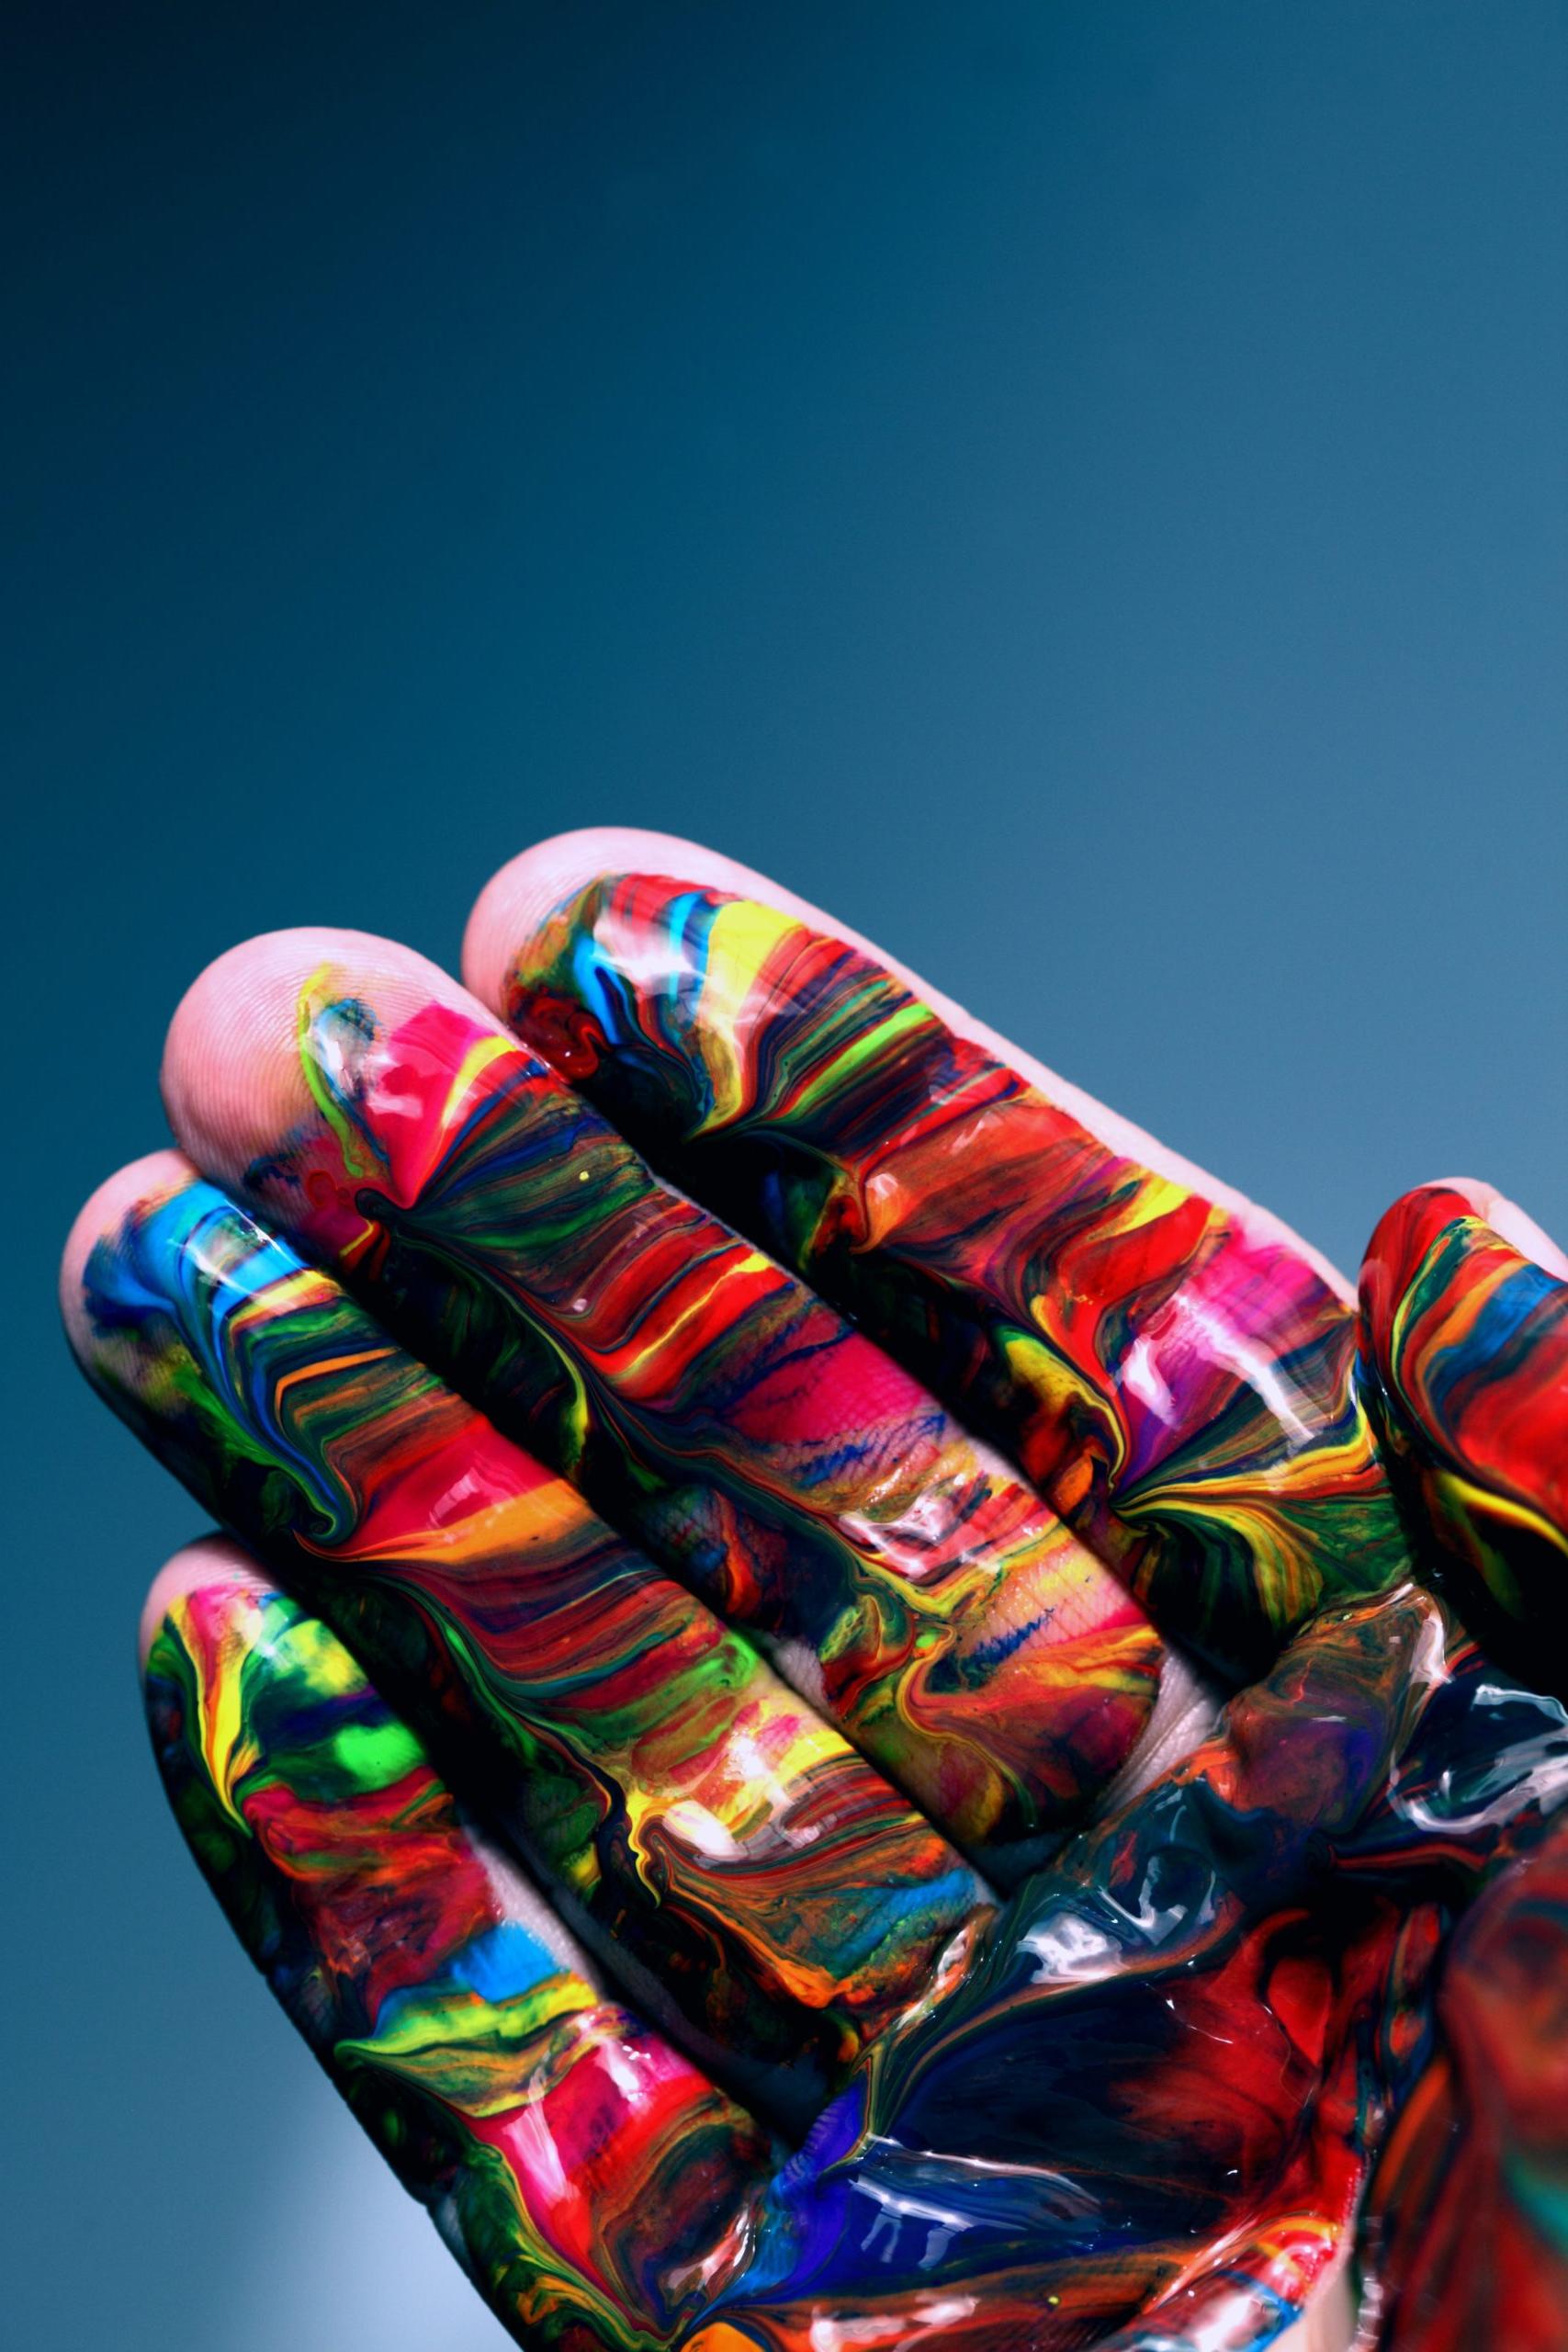 A hand with colorful paint on the fingers and palm